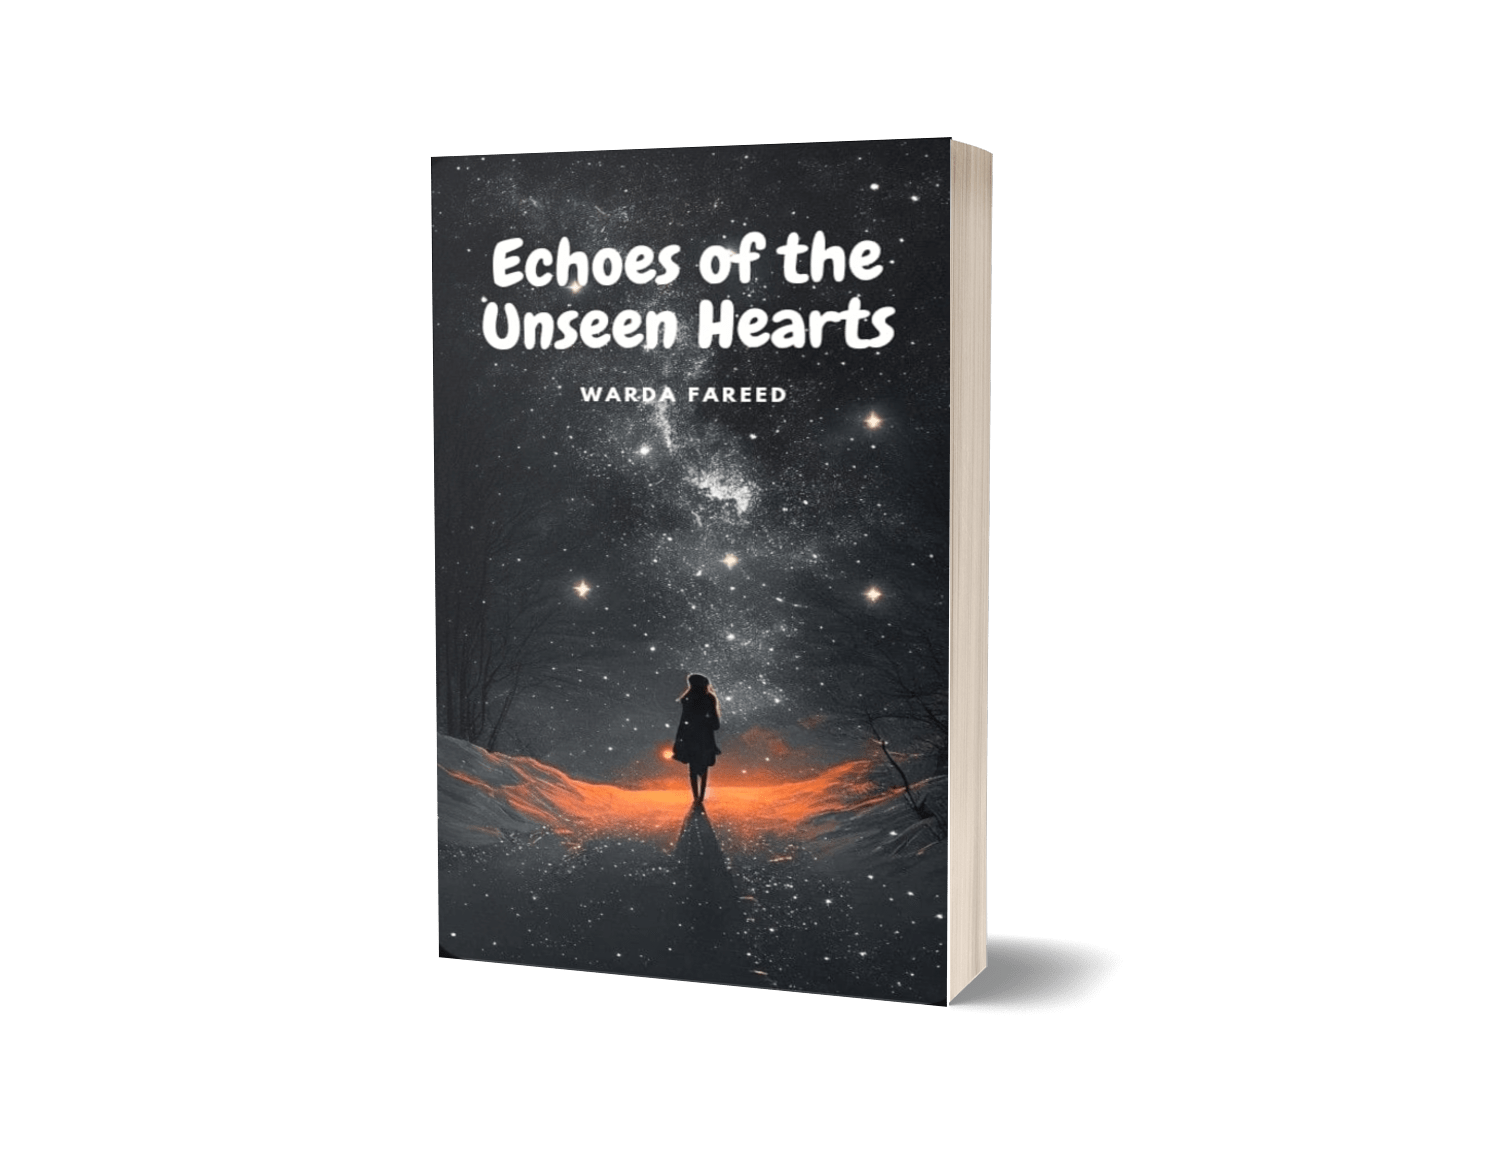 Echoes of the Unseen Heart by Warda Fareed